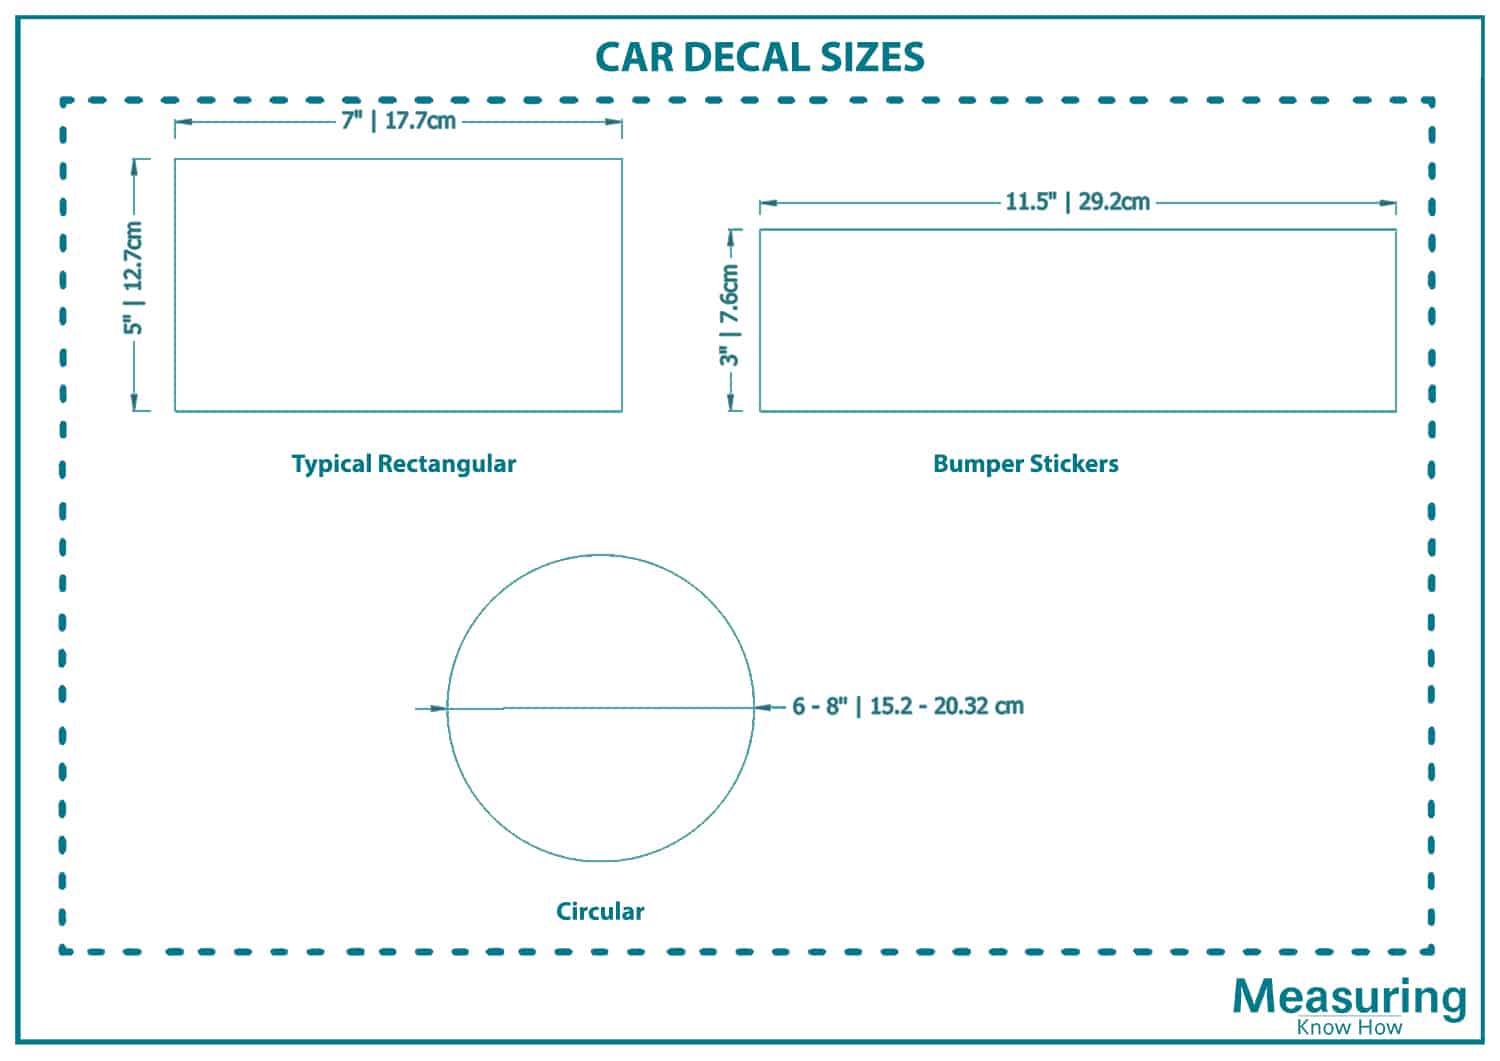 Typical car decal sizes